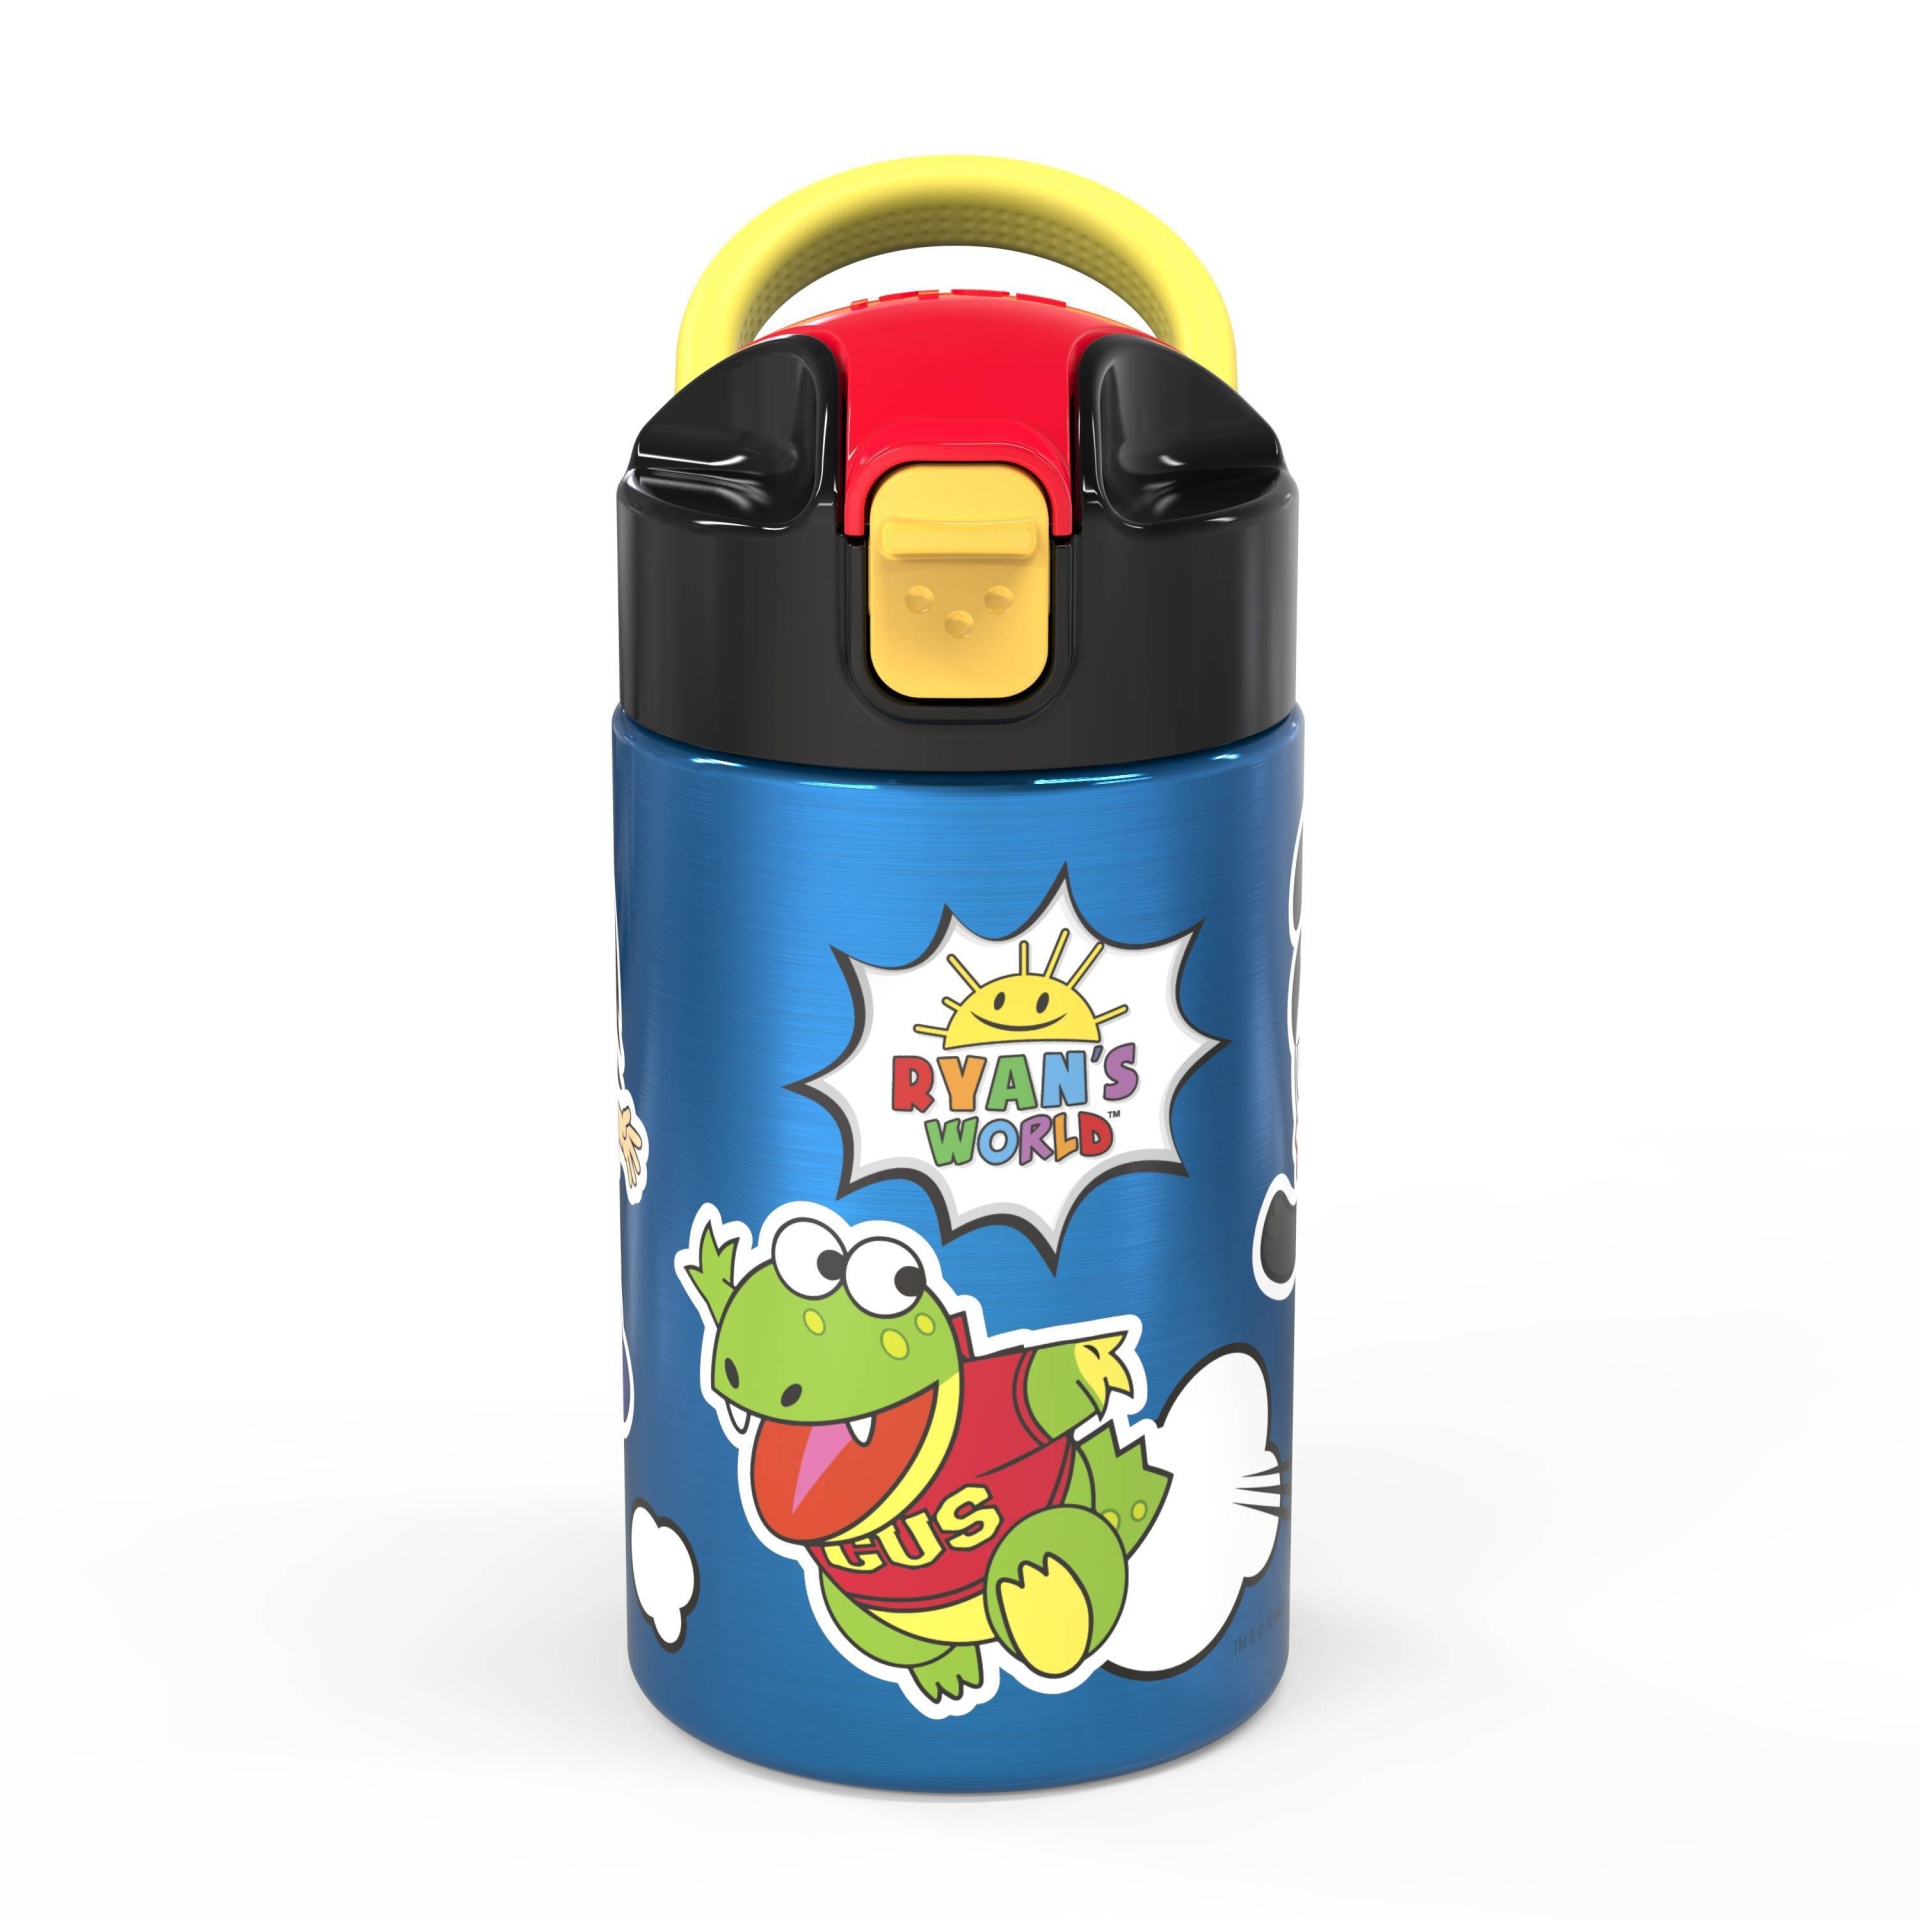 Zak Designs 14oz Stainless Steel Kids' Water Bottle with Antimicrobial  Spout 'Disney Mickey Mouse